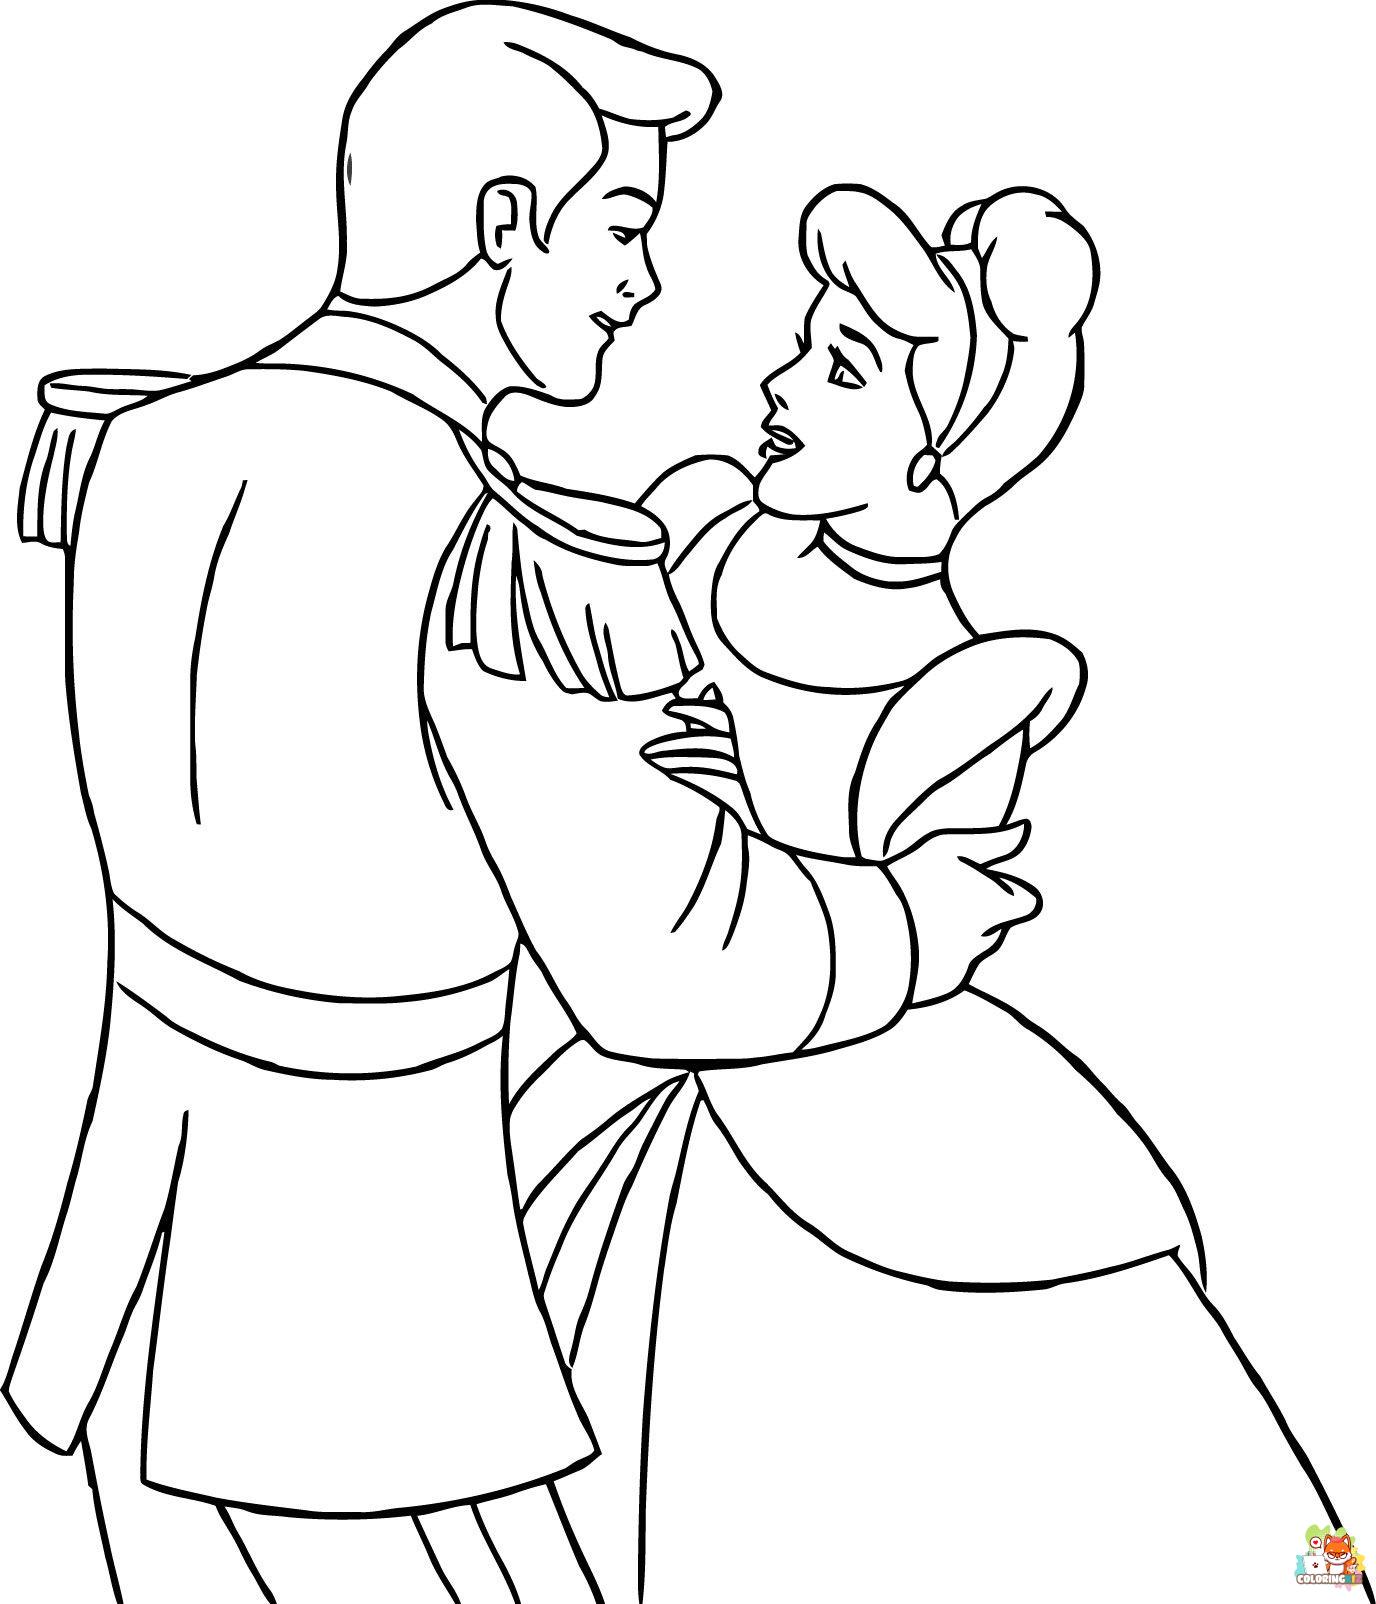 Cinderella with Prince Charming Coloring Pages 1